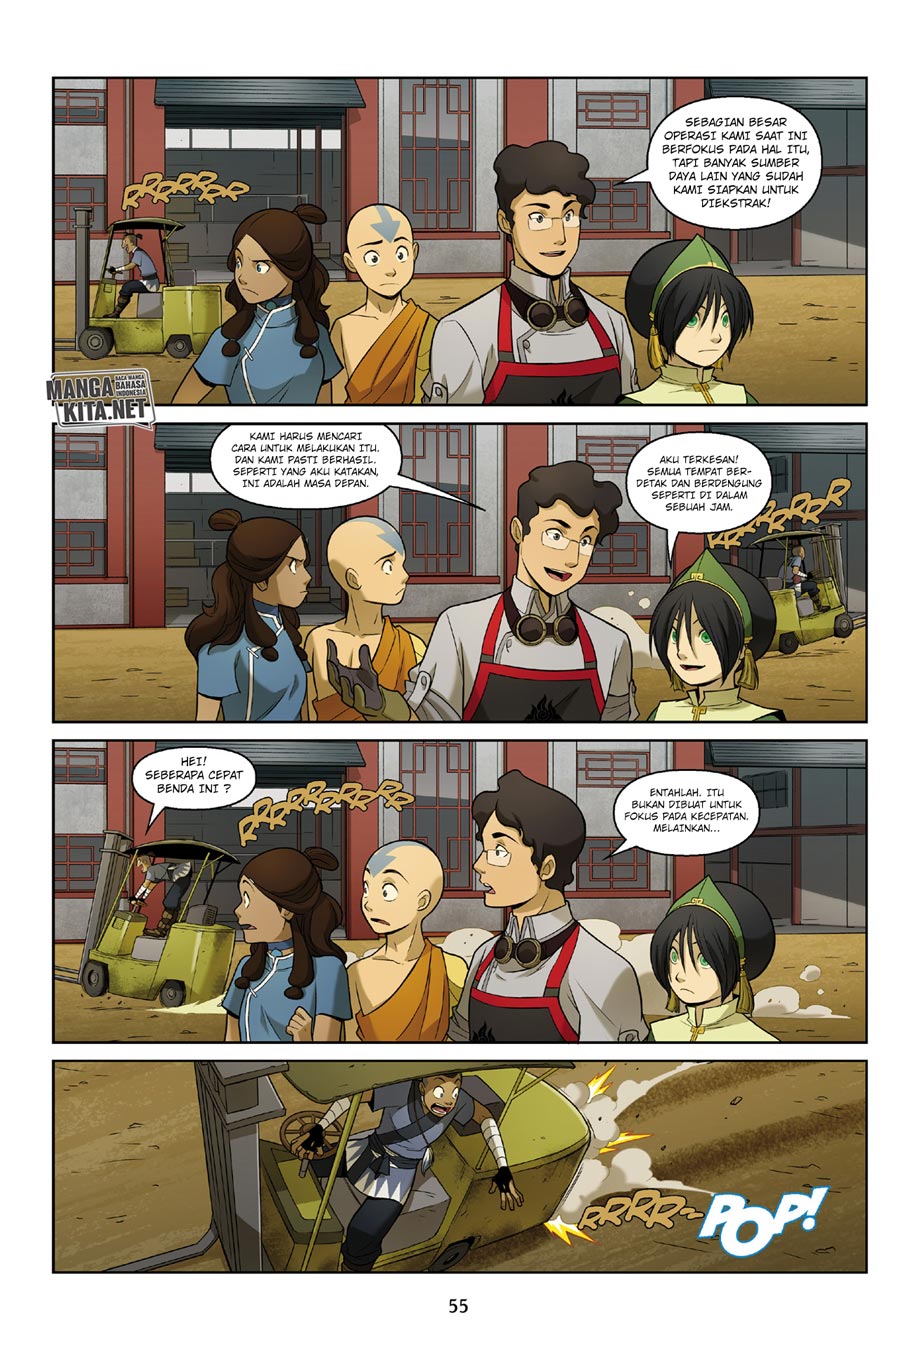 Avatar: The Last Airbender – The Rift Chapter 01.3 - 189